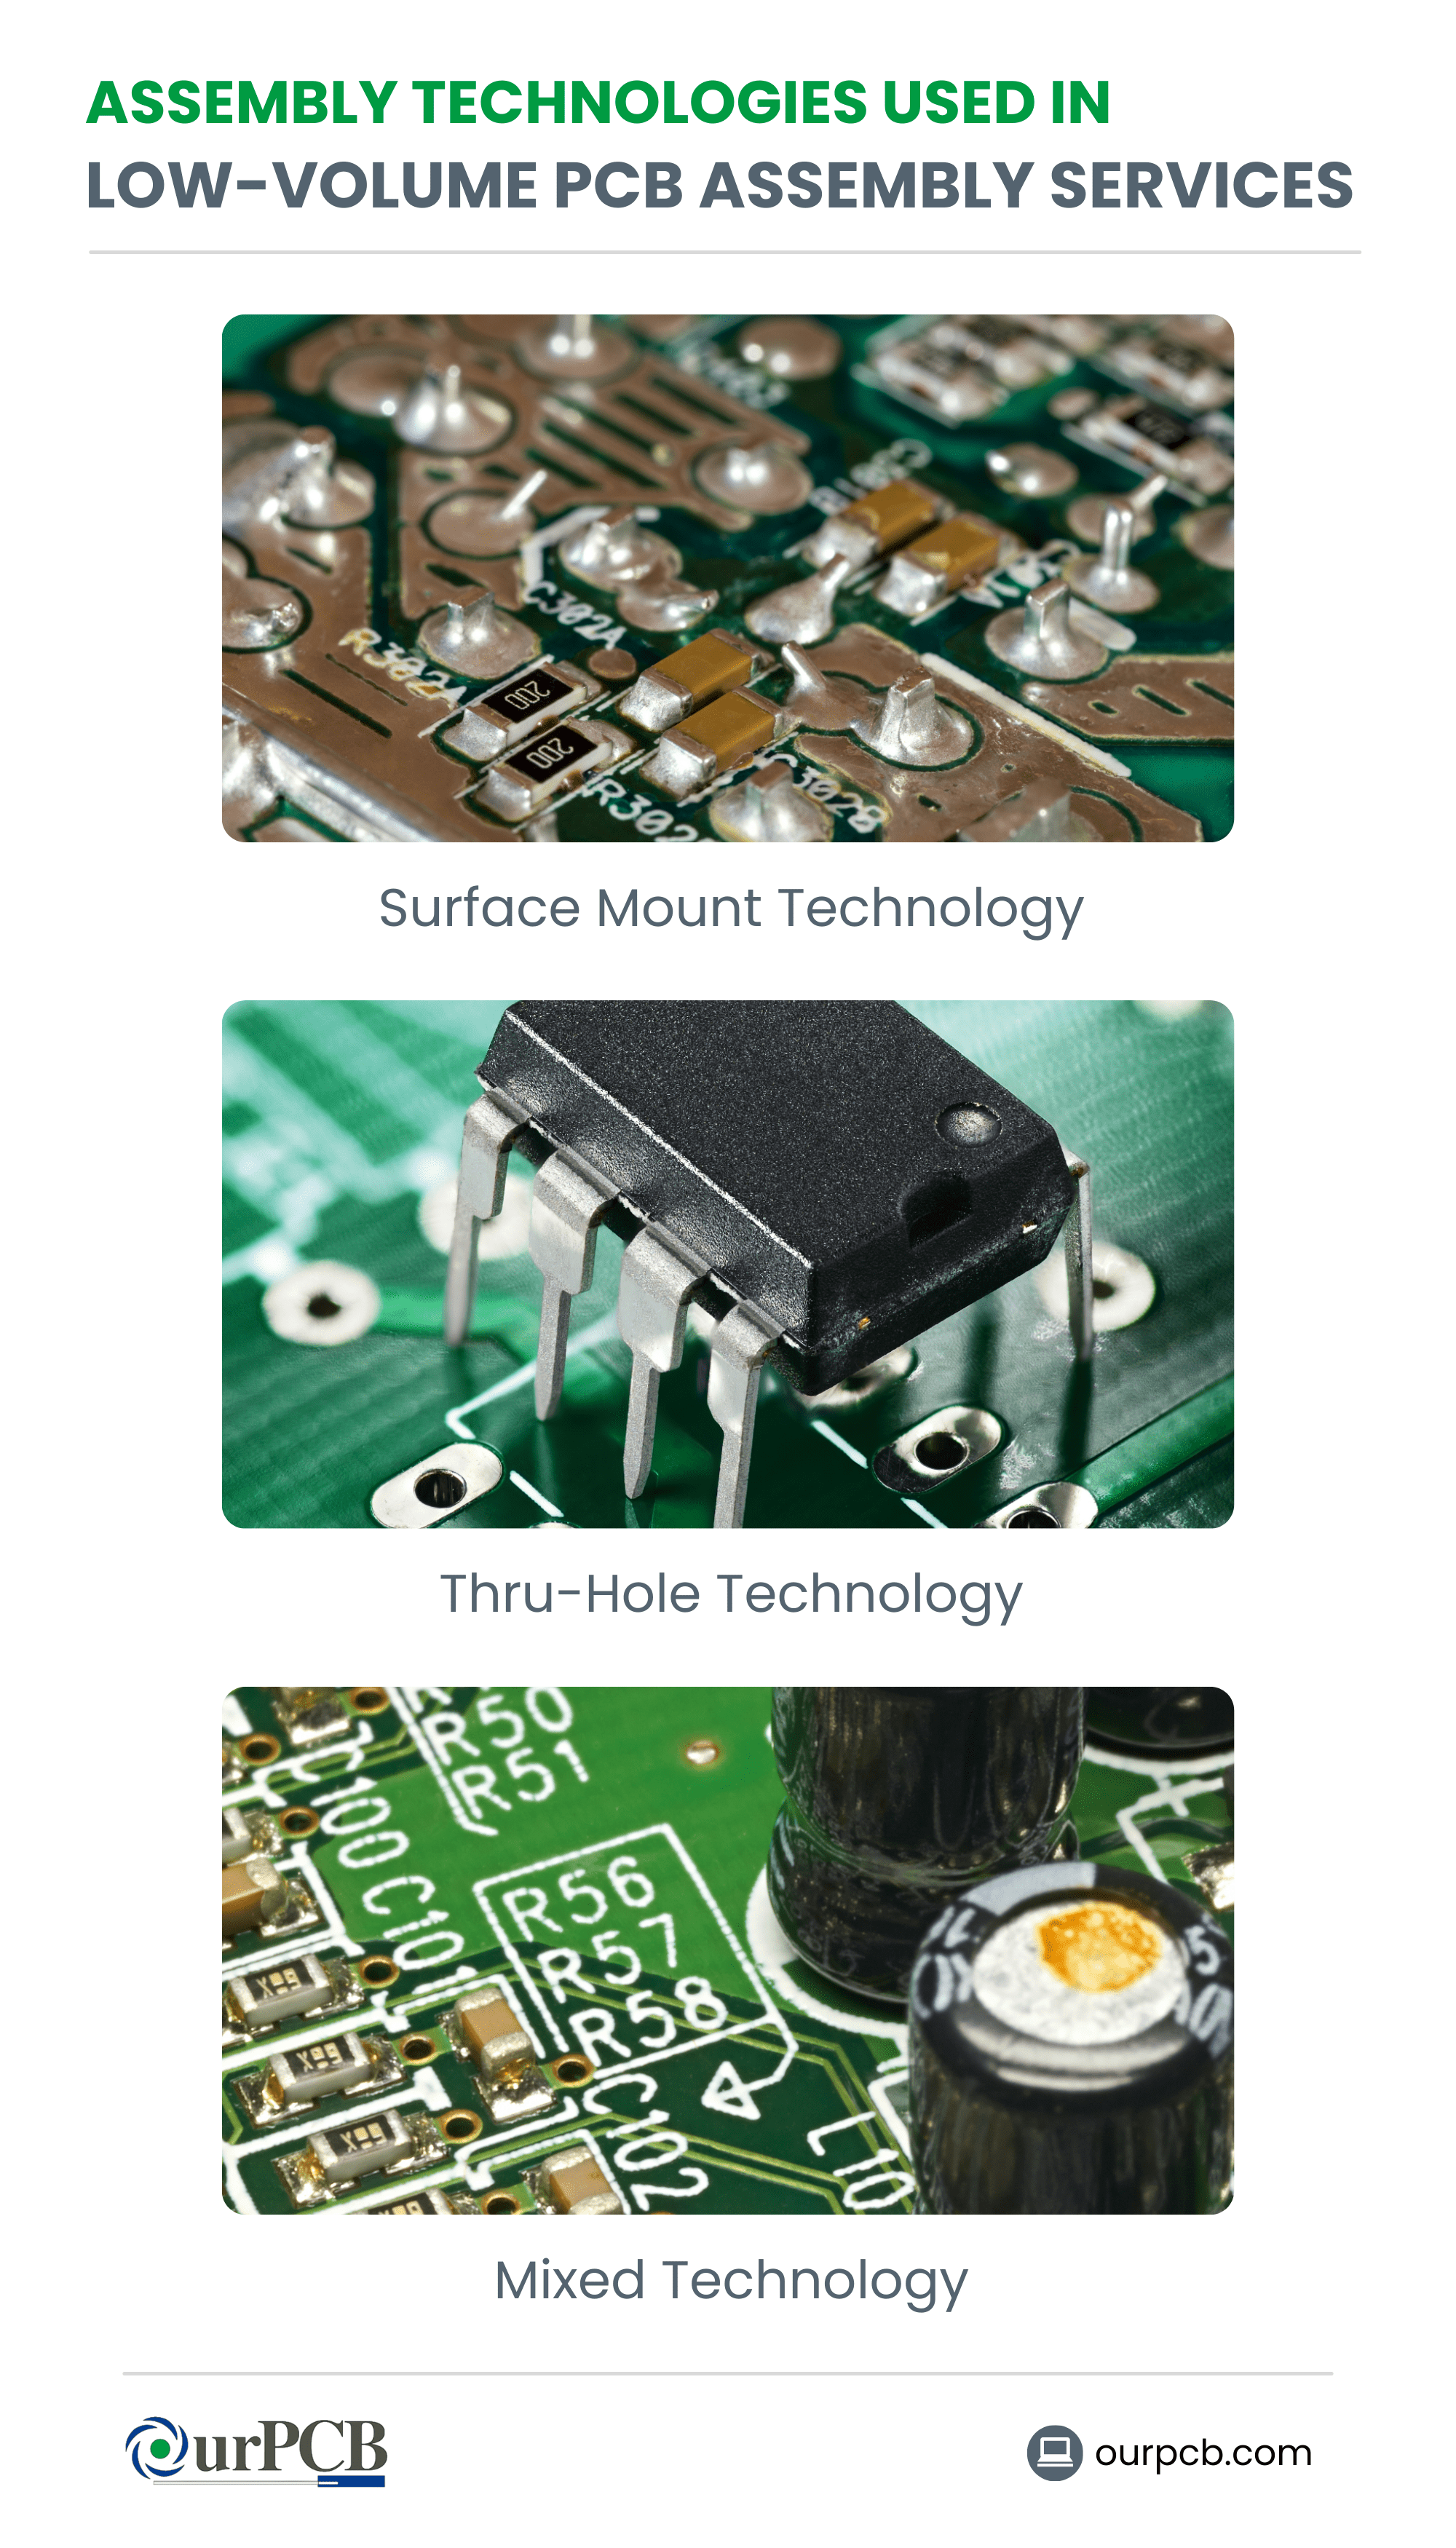 Low-Volume PCB Assembly Services Technologies